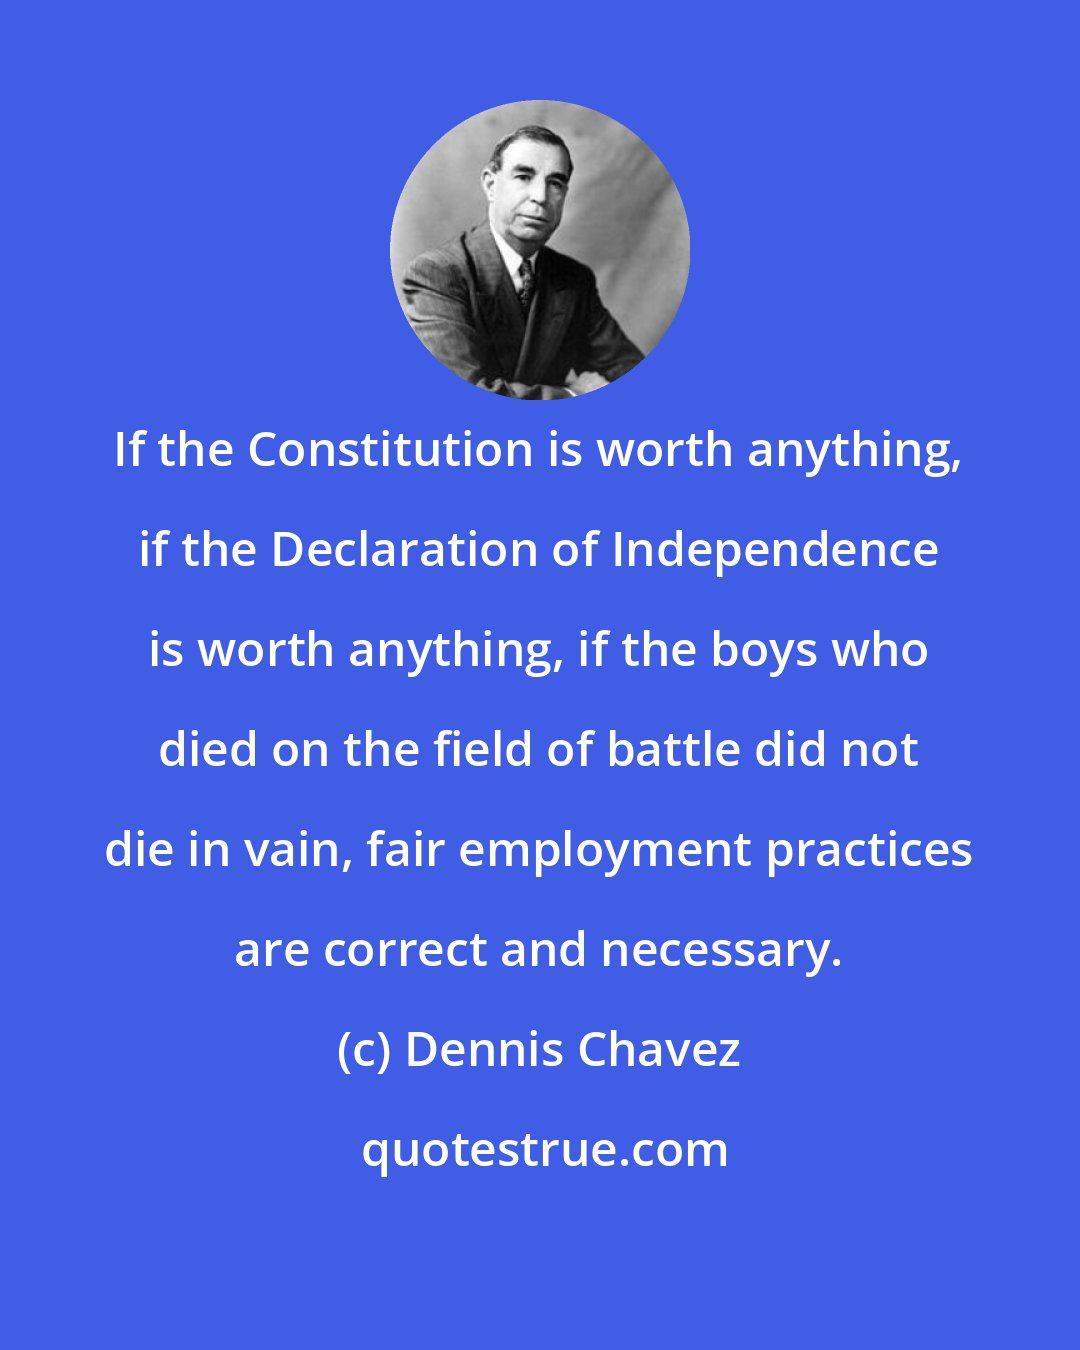 Dennis Chavez: If the Constitution is worth anything, if the Declaration of Independence is worth anything, if the boys who died on the field of battle did not die in vain, fair employment practices are correct and necessary.